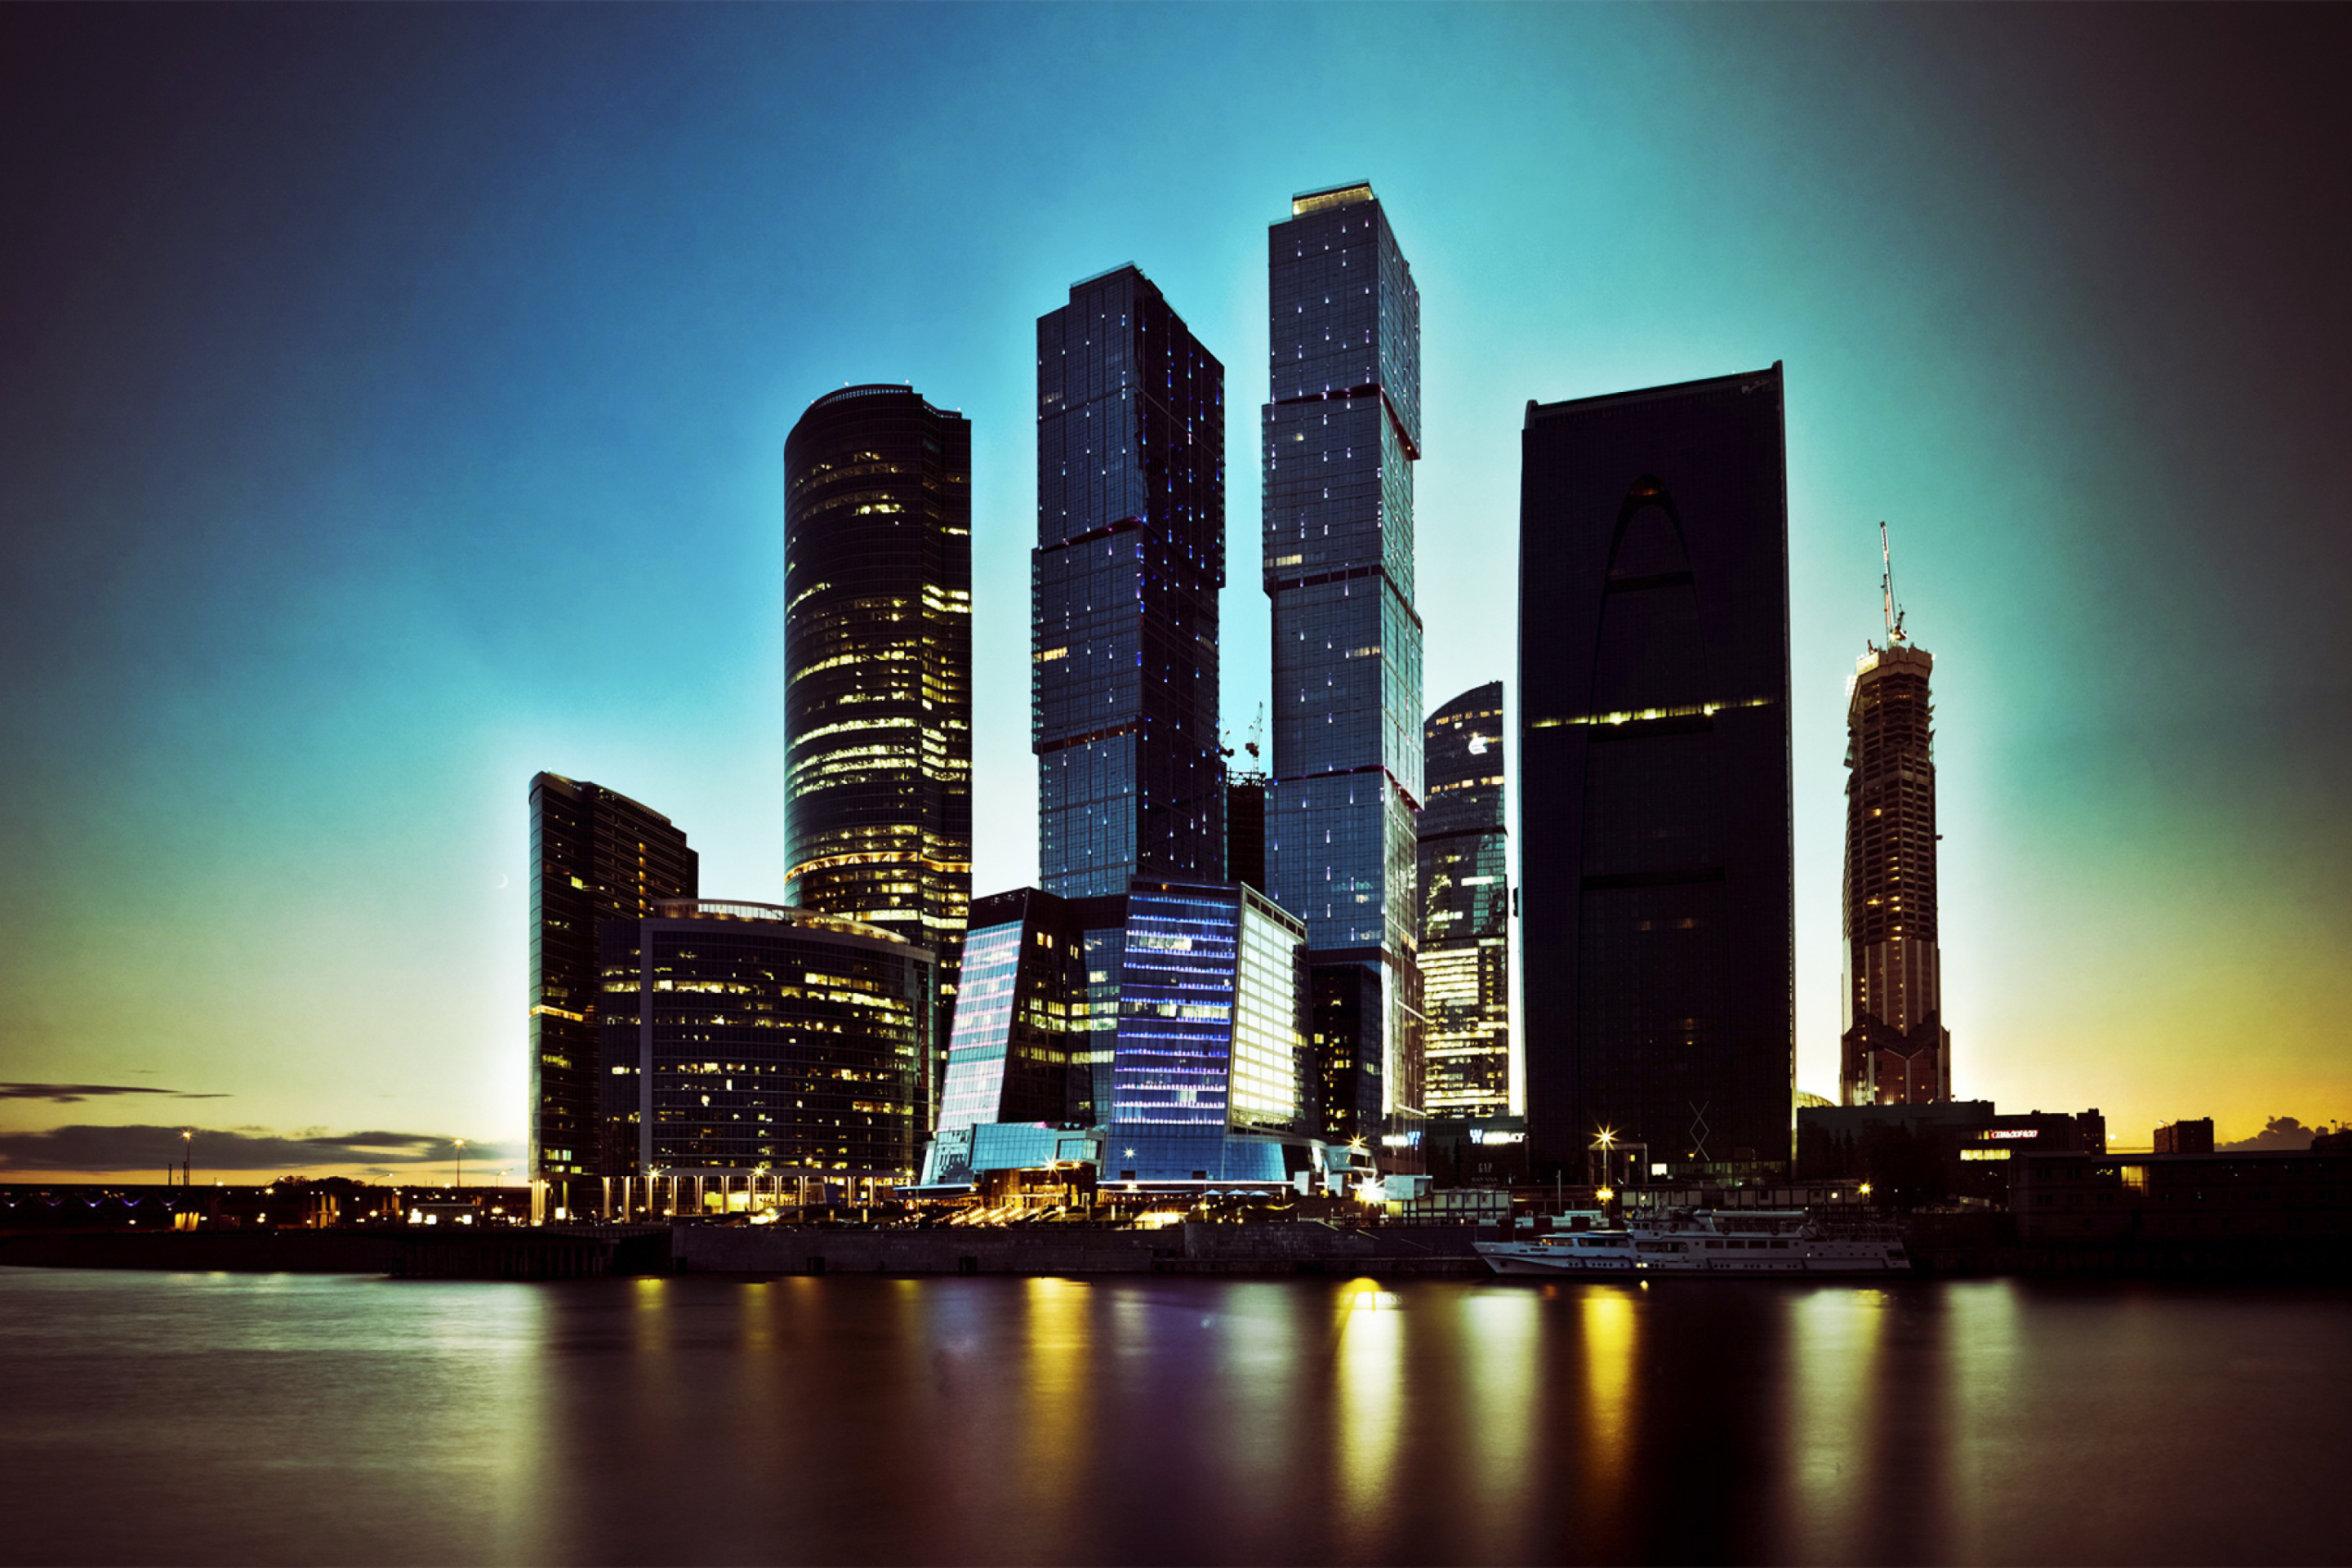 Moscow City Skyscrapers wallpaper 2880x1920